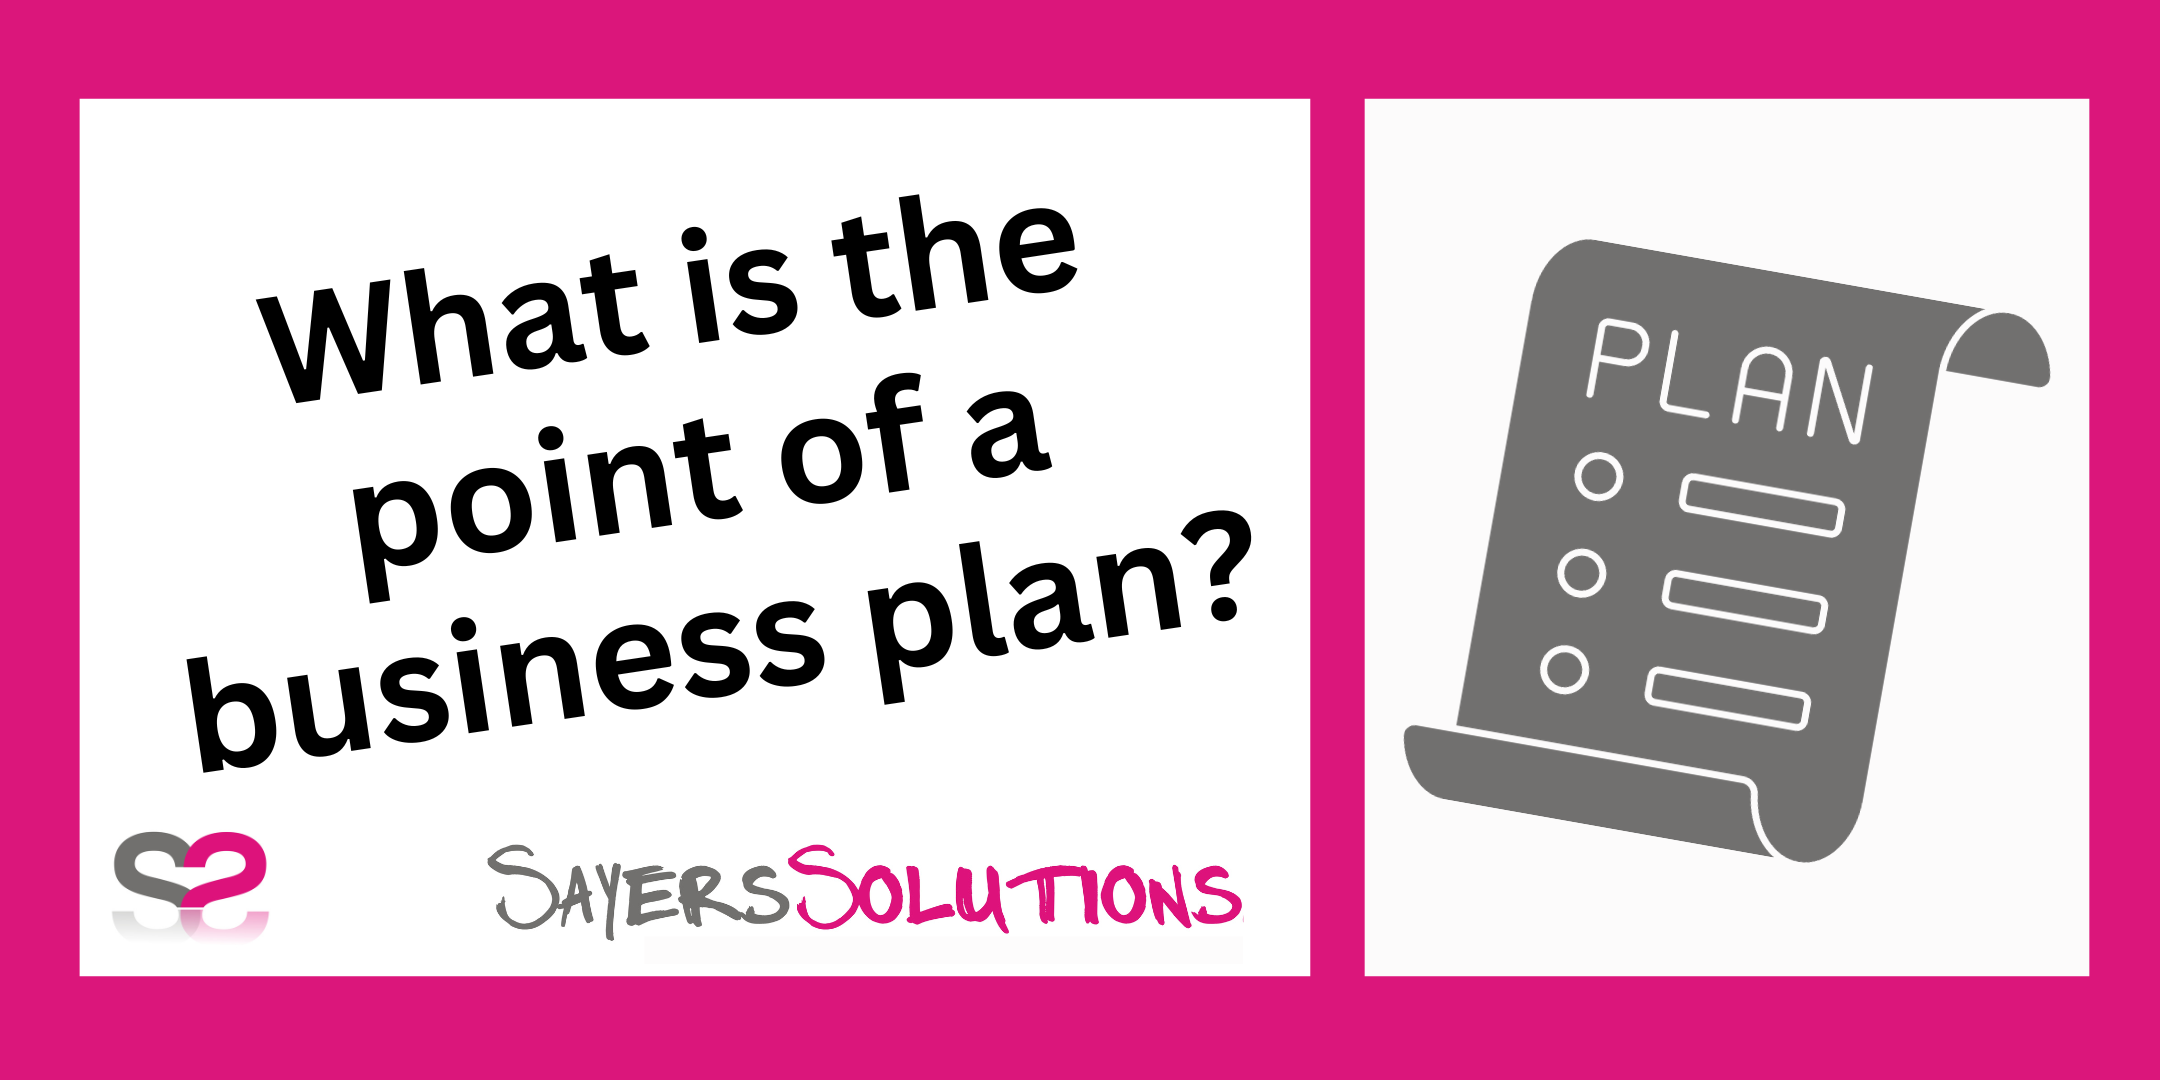 What’s the point of a business plan?